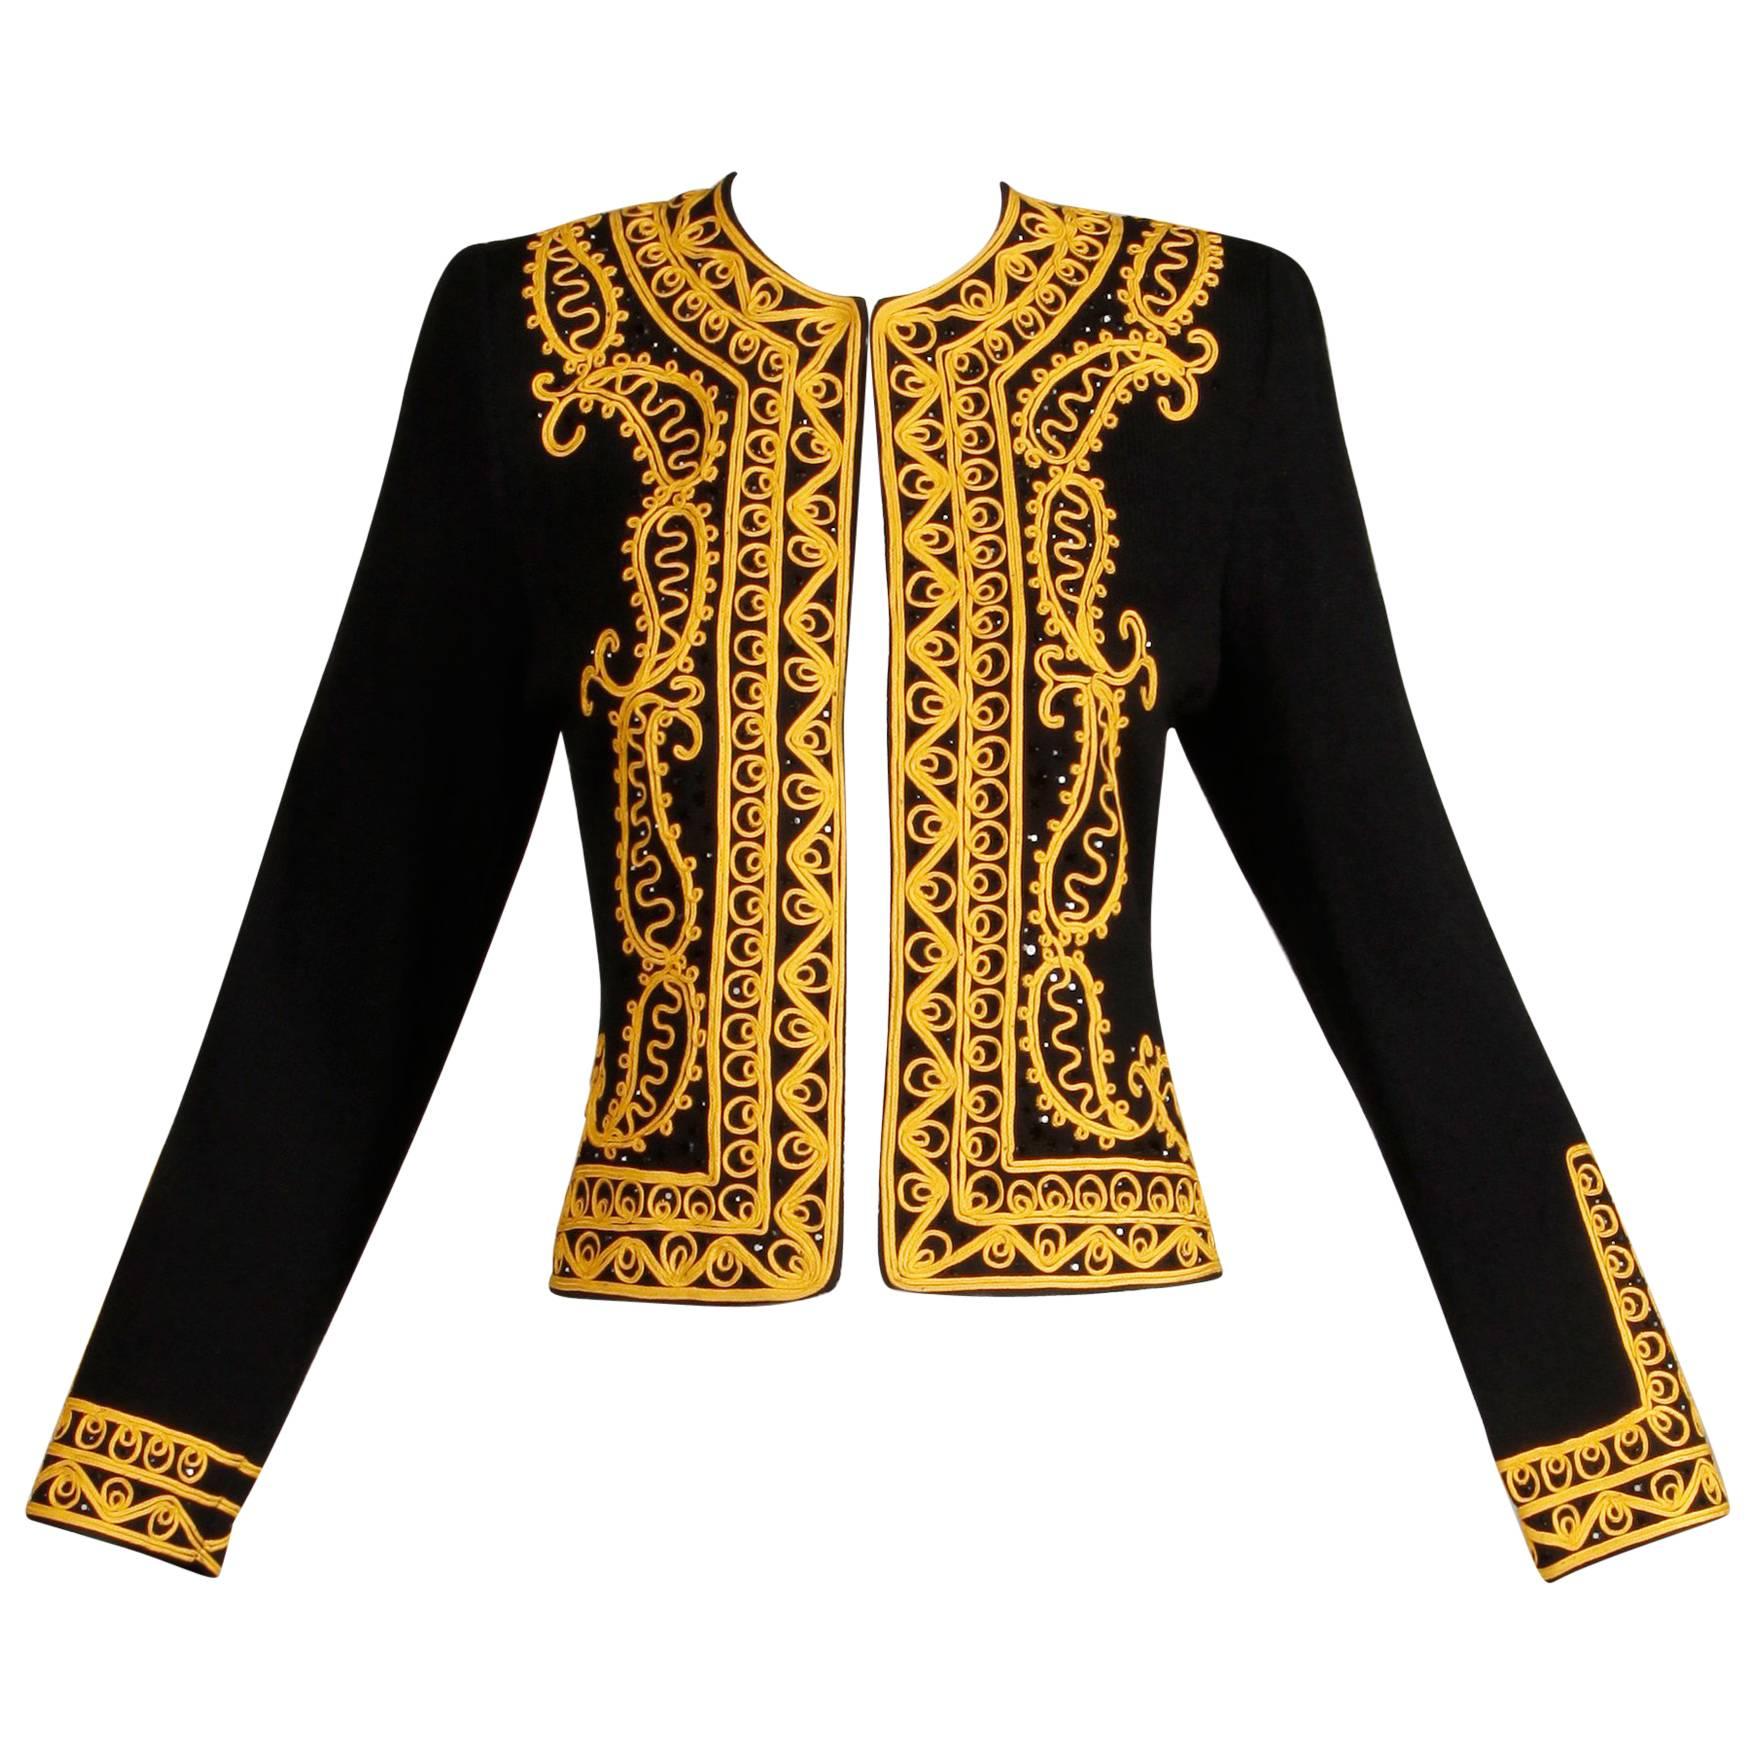 Adolfo Vintage Black Beaded Knit Cardigan Sweater Jacket with Gold Embroidery